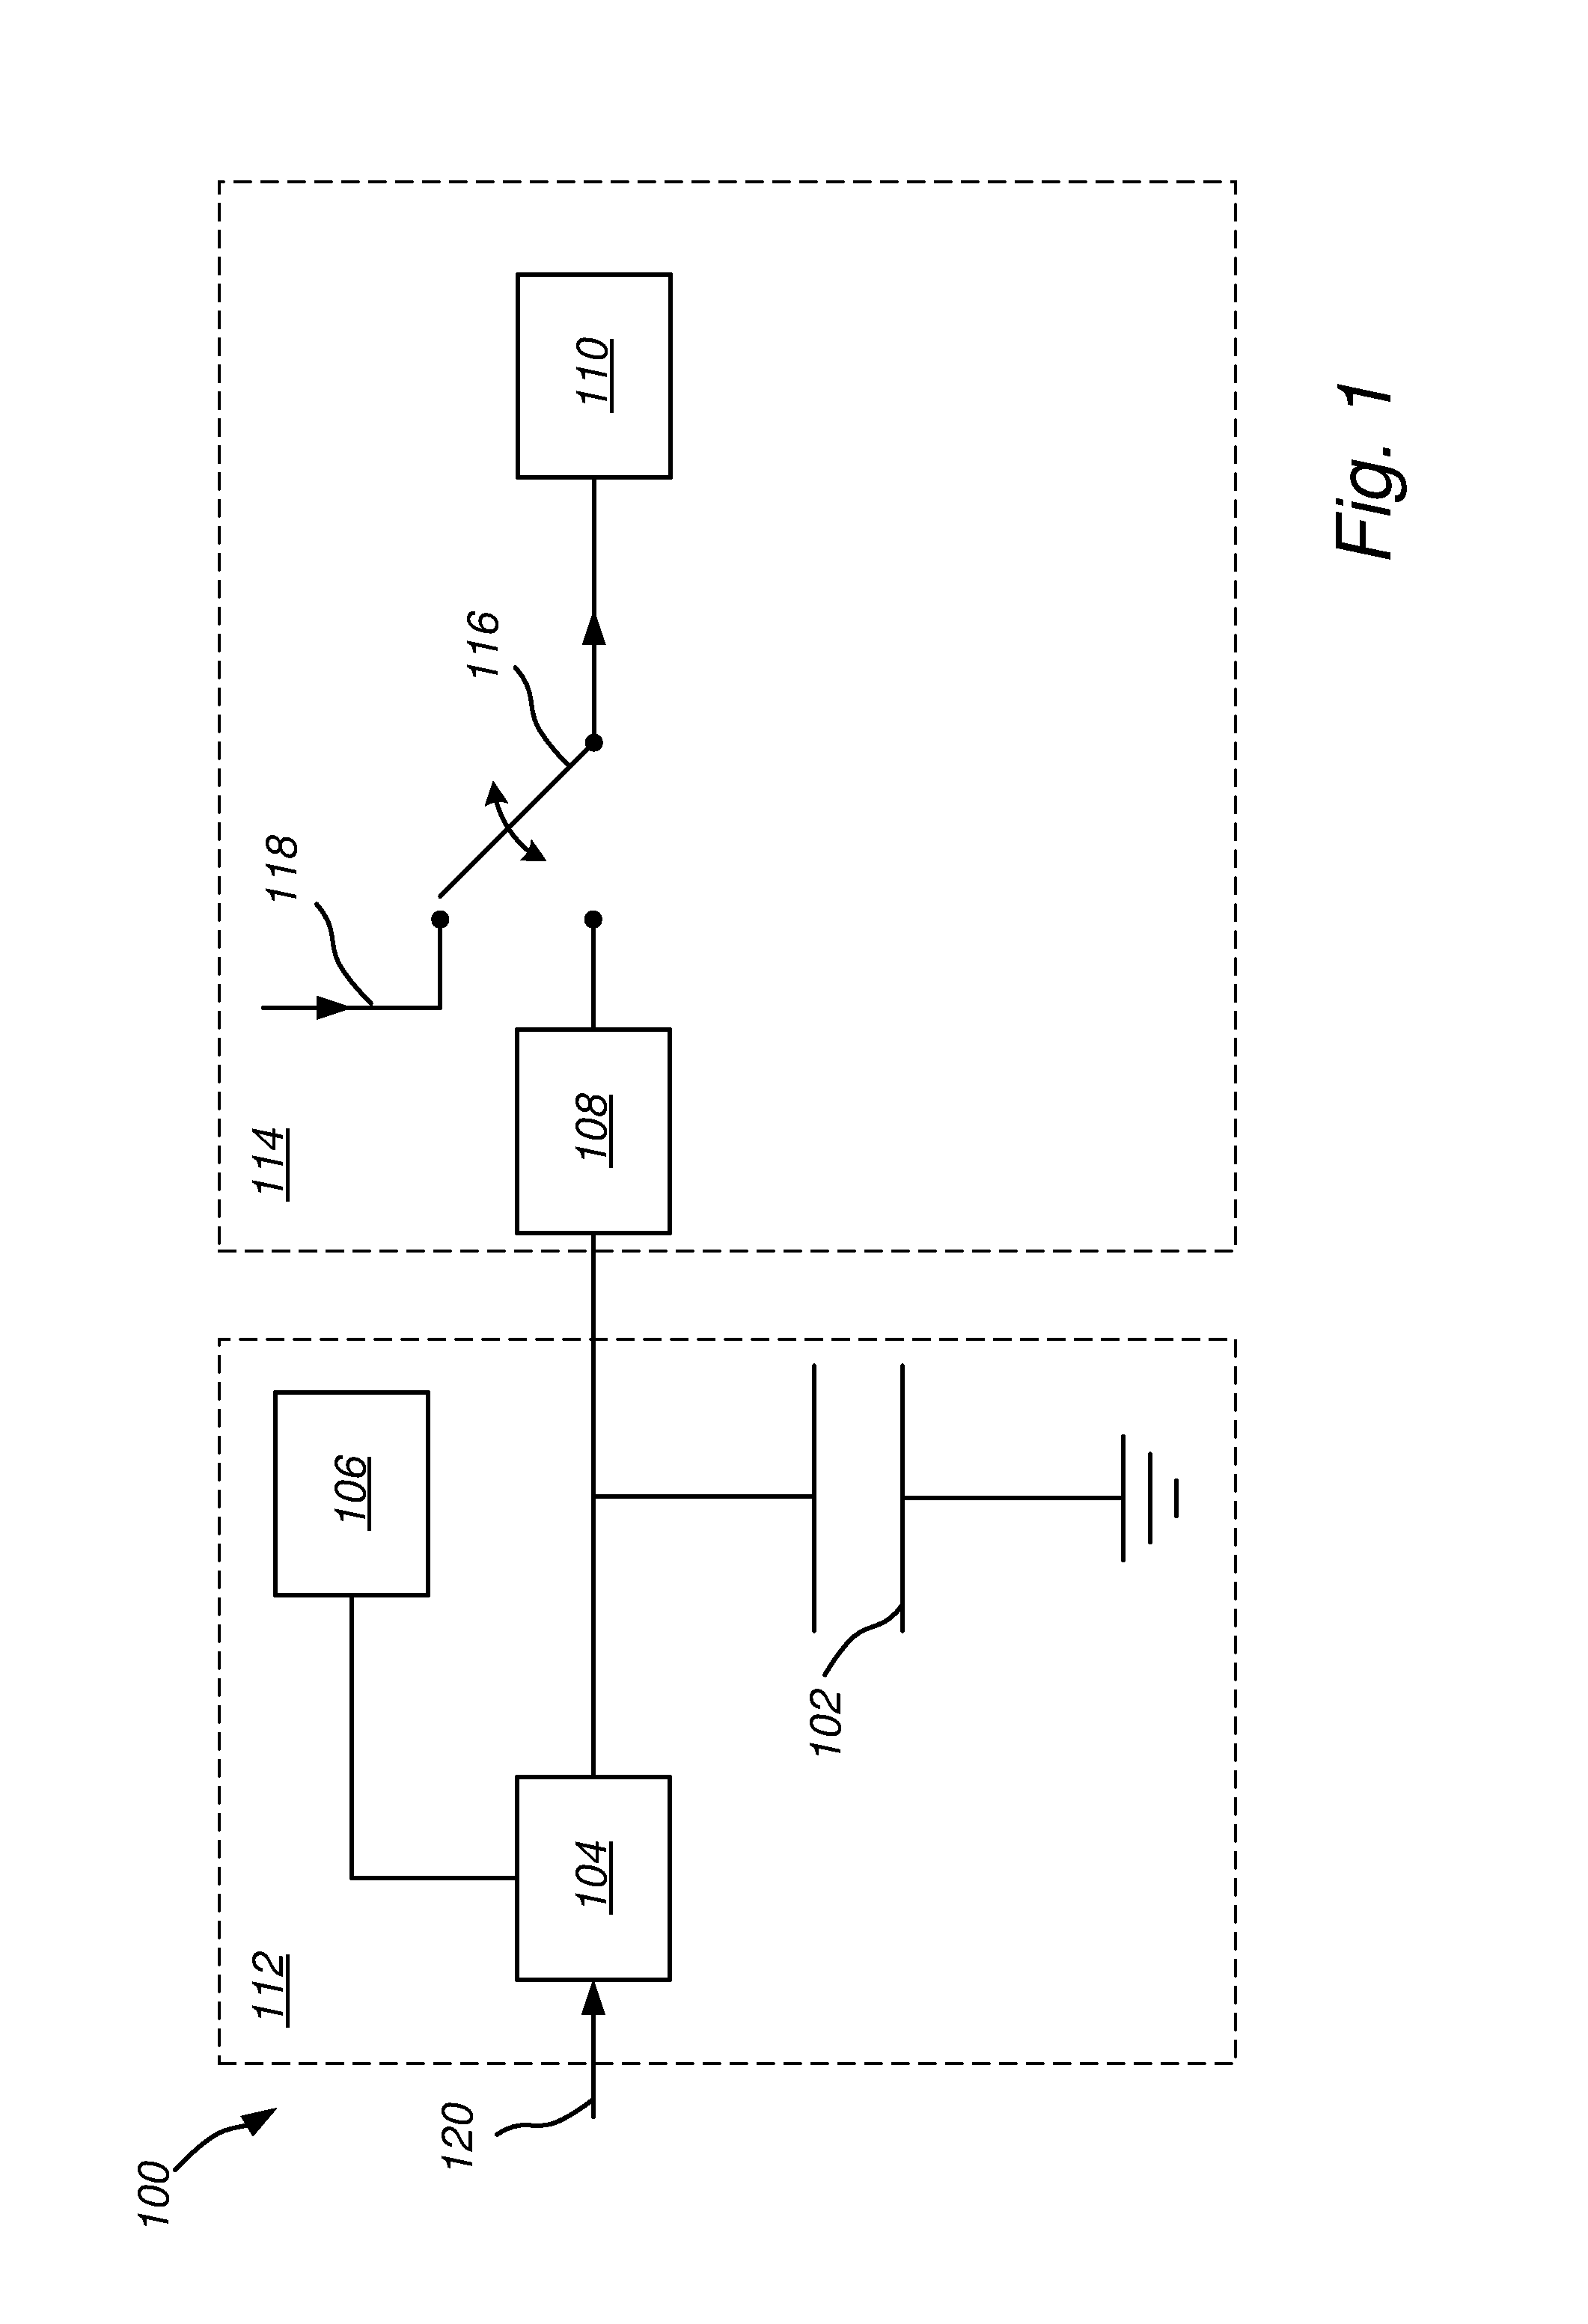 Adjustment of a capacitor charge voltage